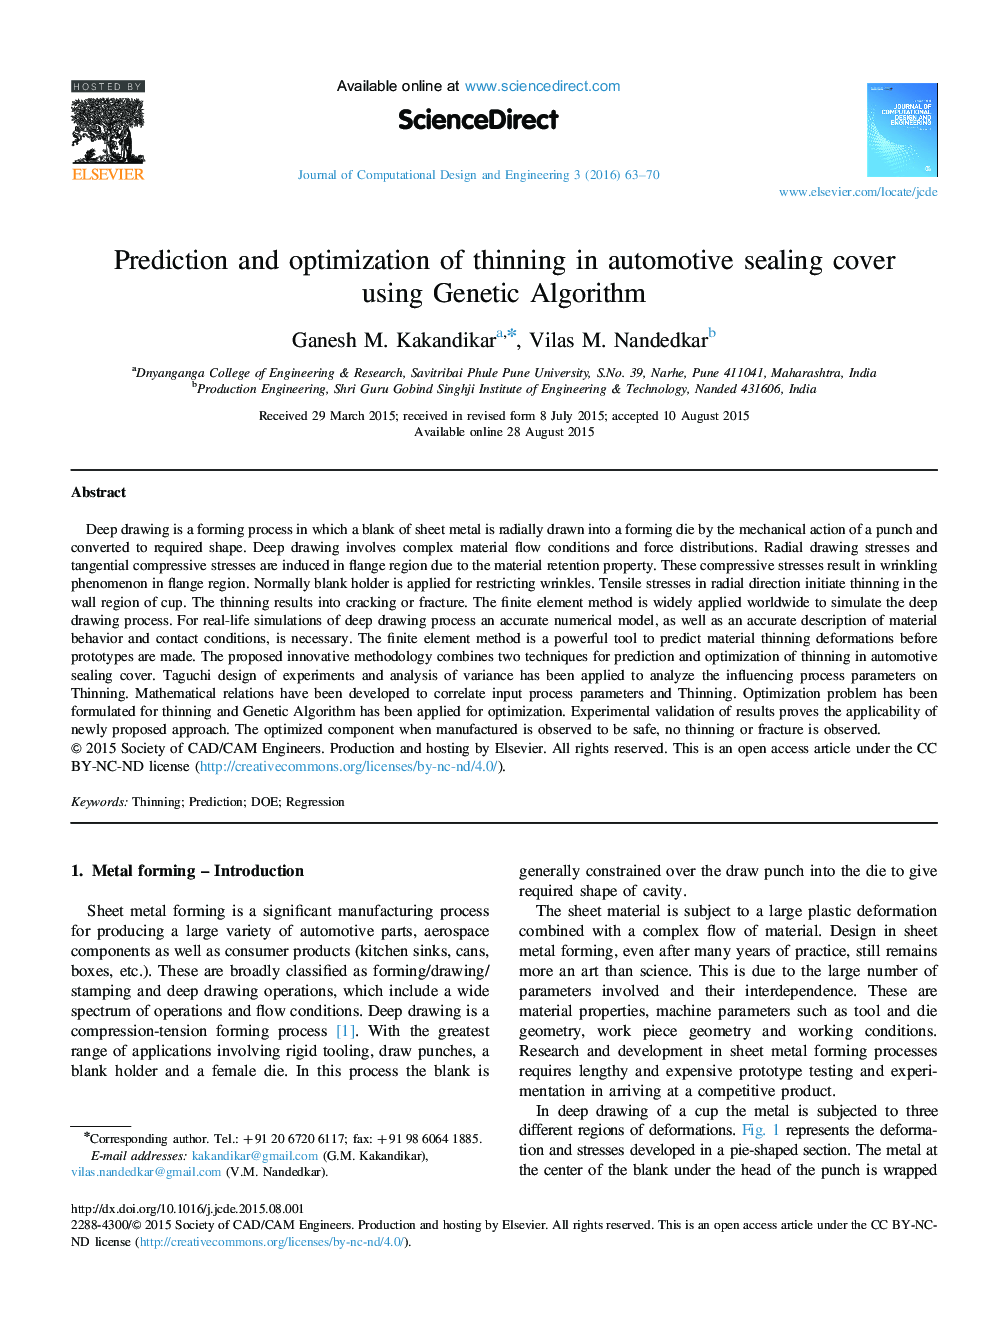 Prediction and optimization of thinning in automotive sealing cover using Genetic Algorithm